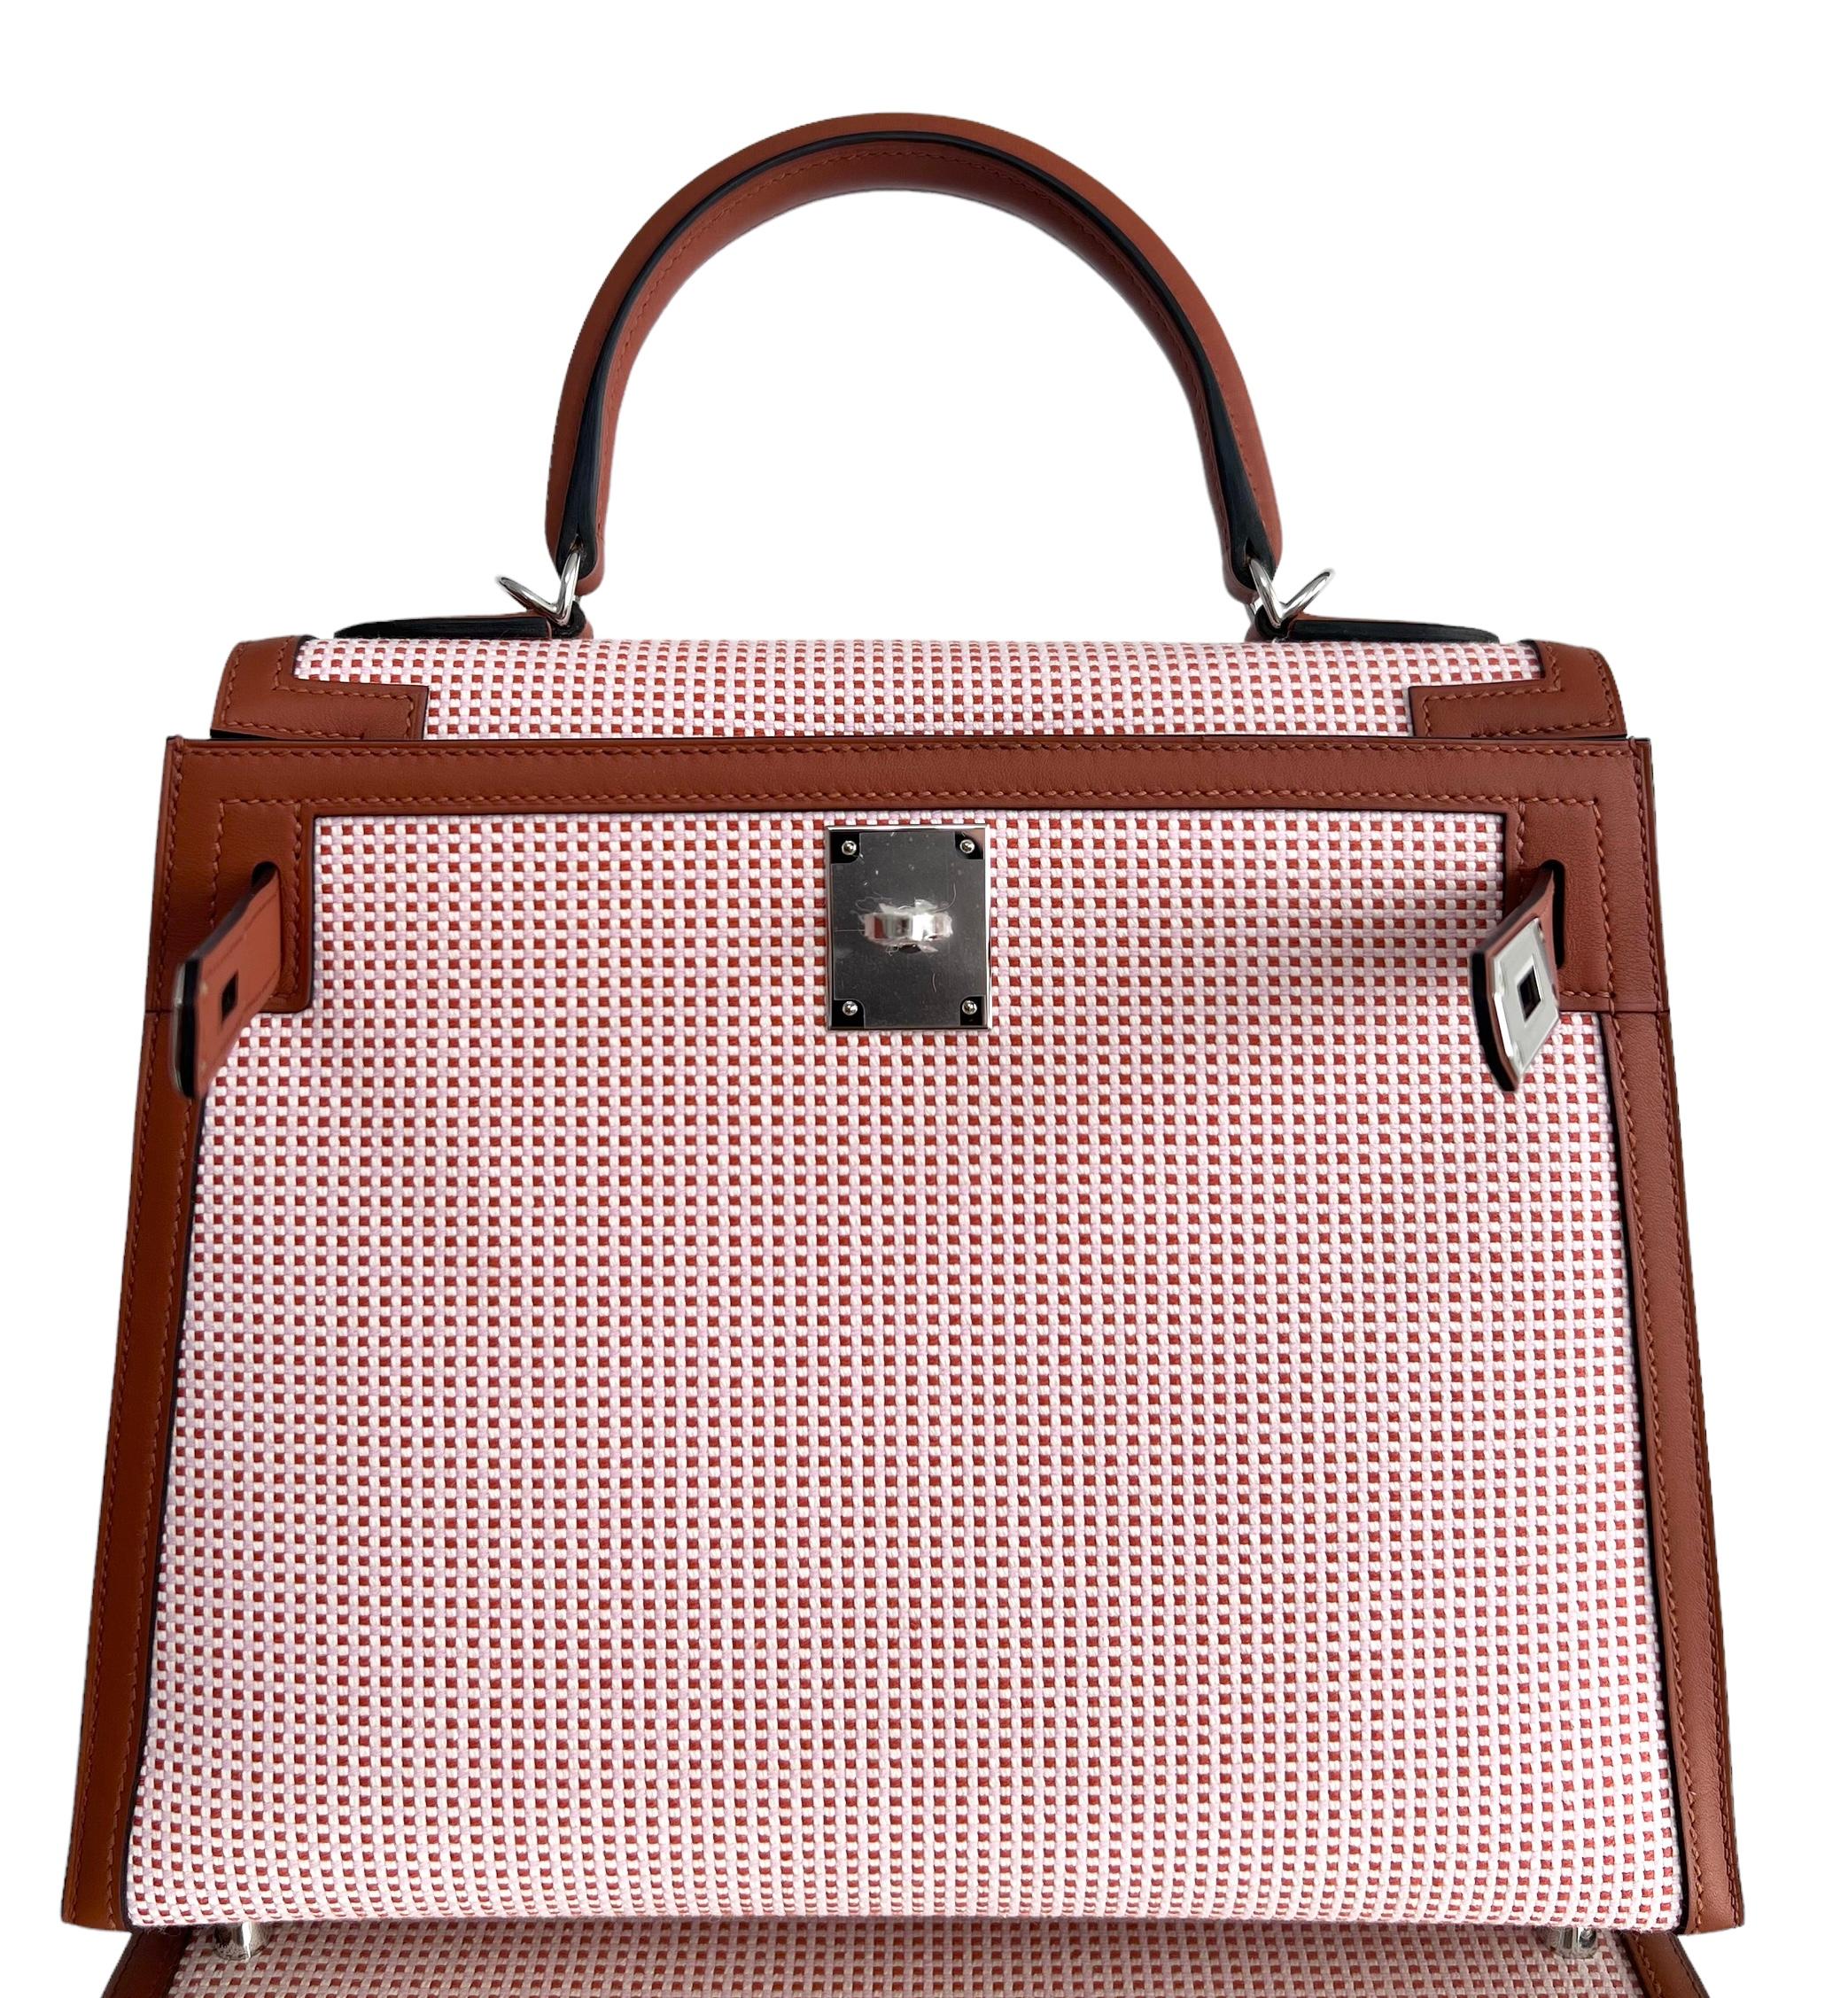 Stunning Rare New 2022 Hermes Kelly 28 Sellier Quadrile Toile Terre Battue Mauve Sylvester Palladium Hardware. NEW U STAMP 2022. Includes all accessories and. Box.

Shop with confidence from Lux Addicts. Authenticity Guaranteed!

Lux Addicts is a